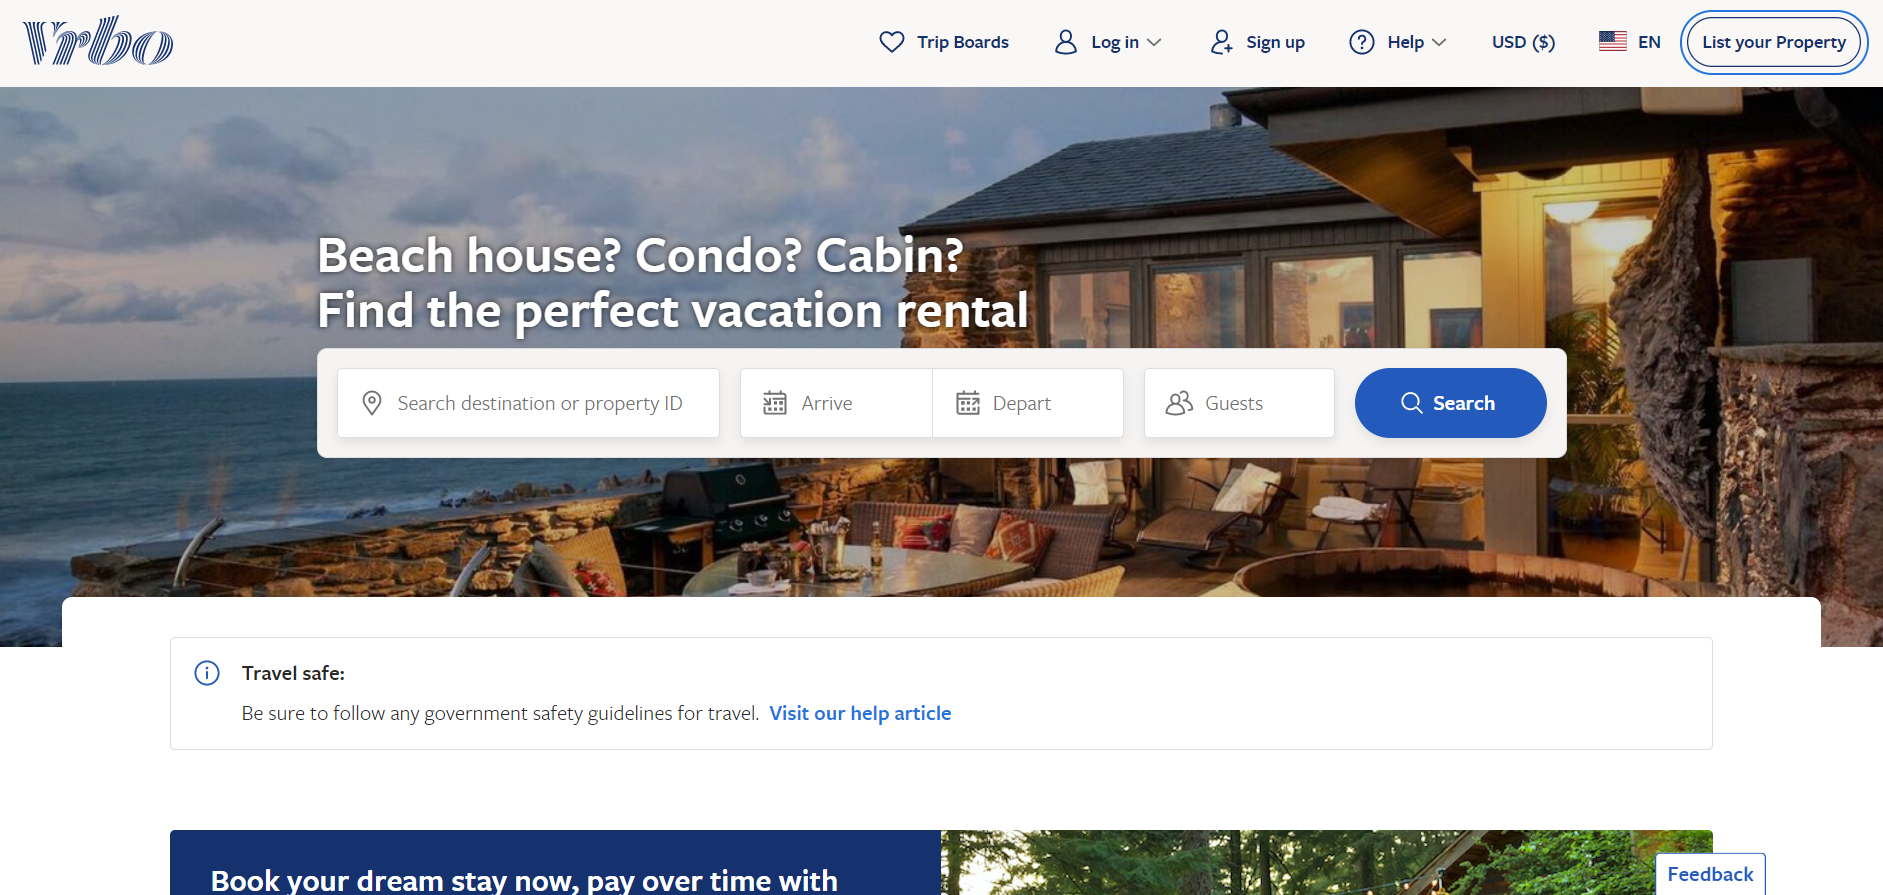 app similar to airbnb